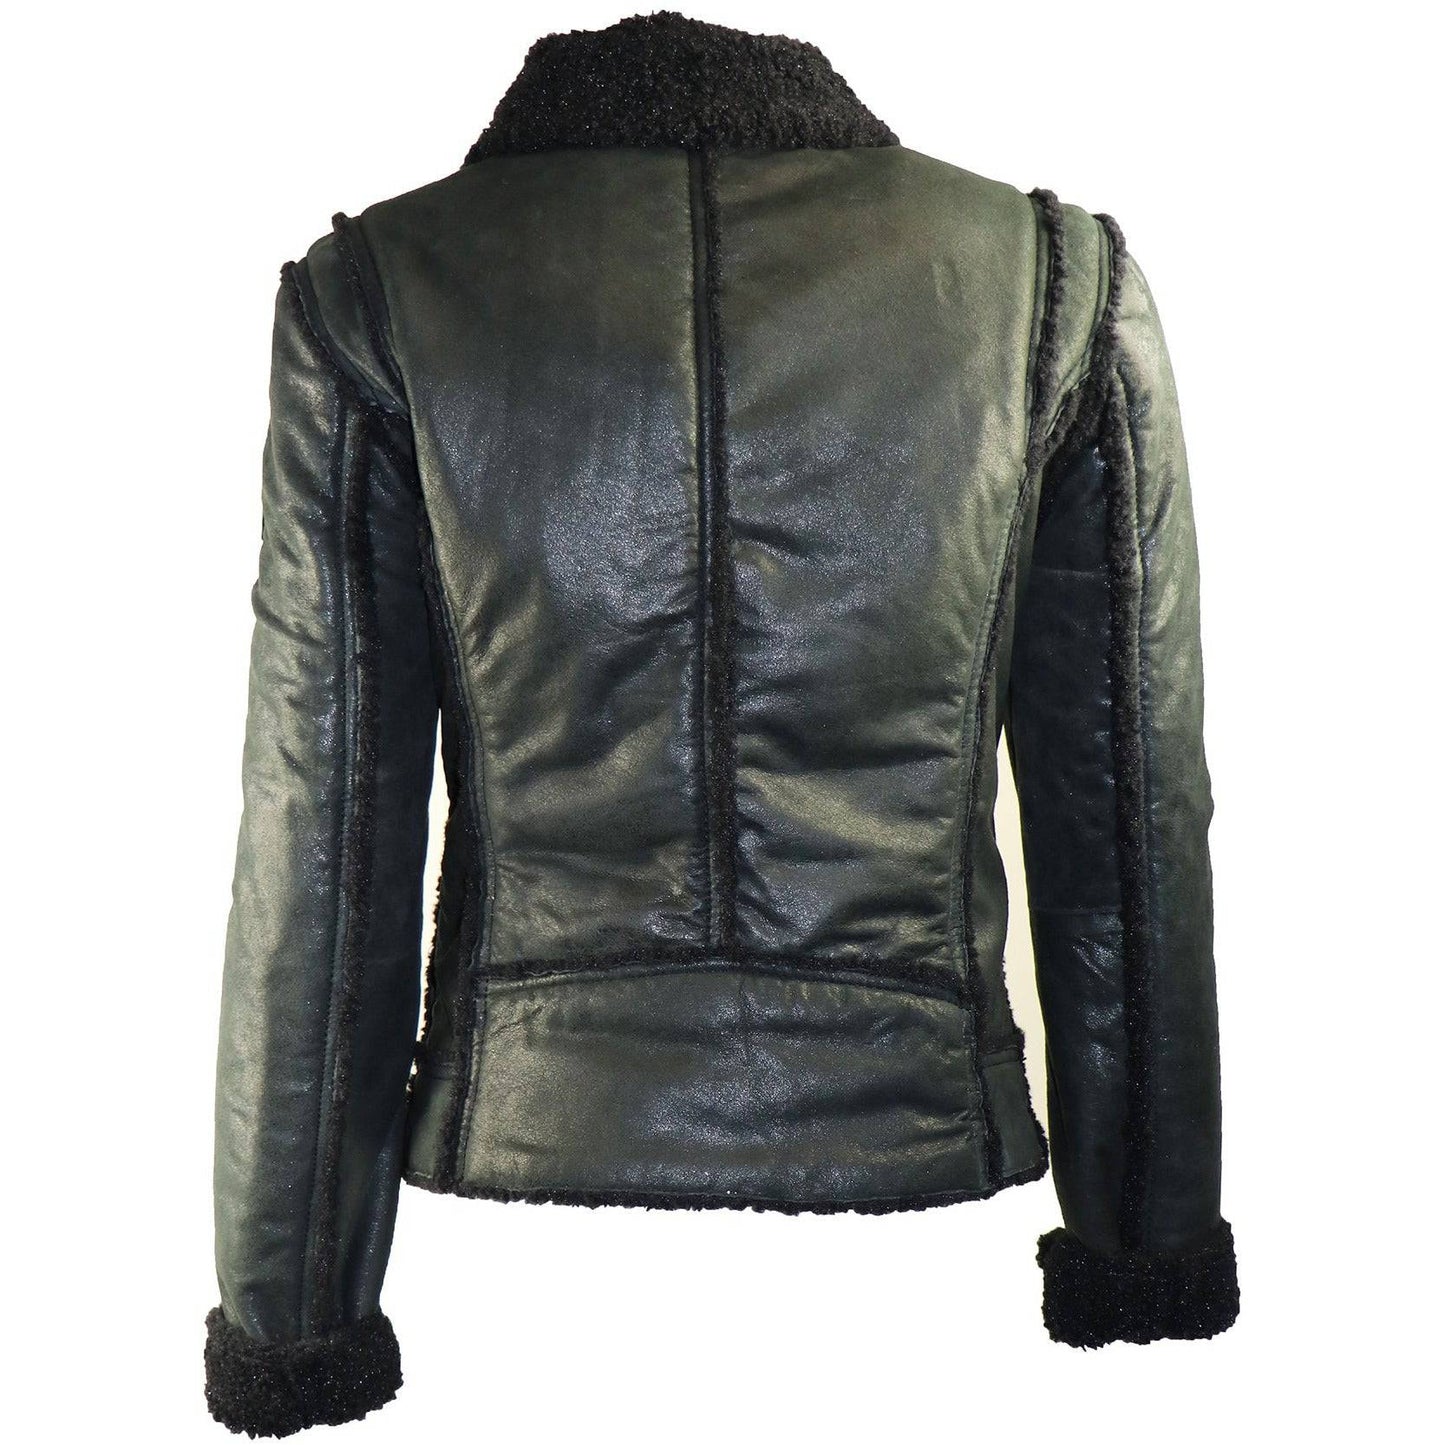 Mauritius Women's Moto  Leather Jacket with Faux Fur Lining